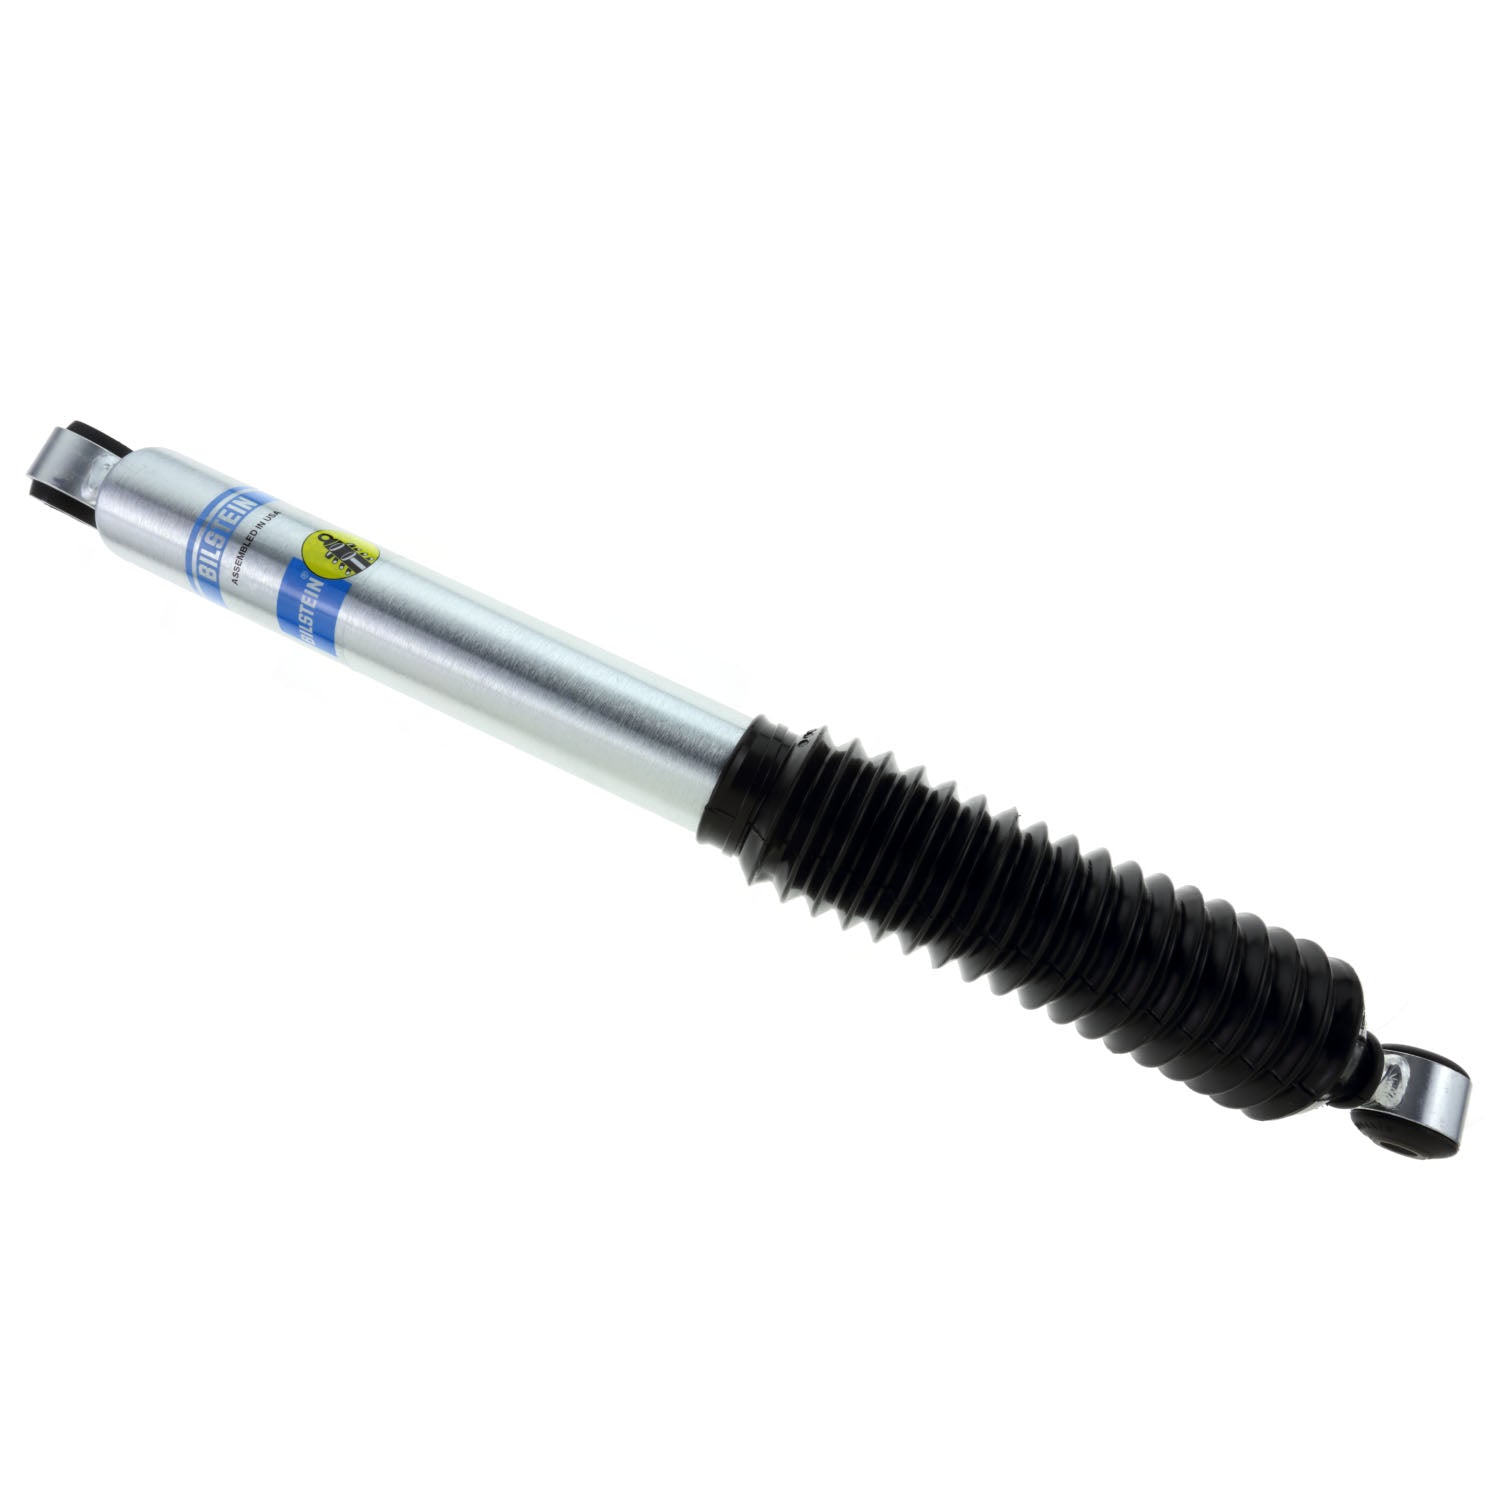 Bilstein 33-187297 Front Bilstein 5100 - 0-2 inch for Leveling, Torsion  Keys and Stock Height Shock Absorber Ford Excursion, F-250 Super Duty,  F-350 